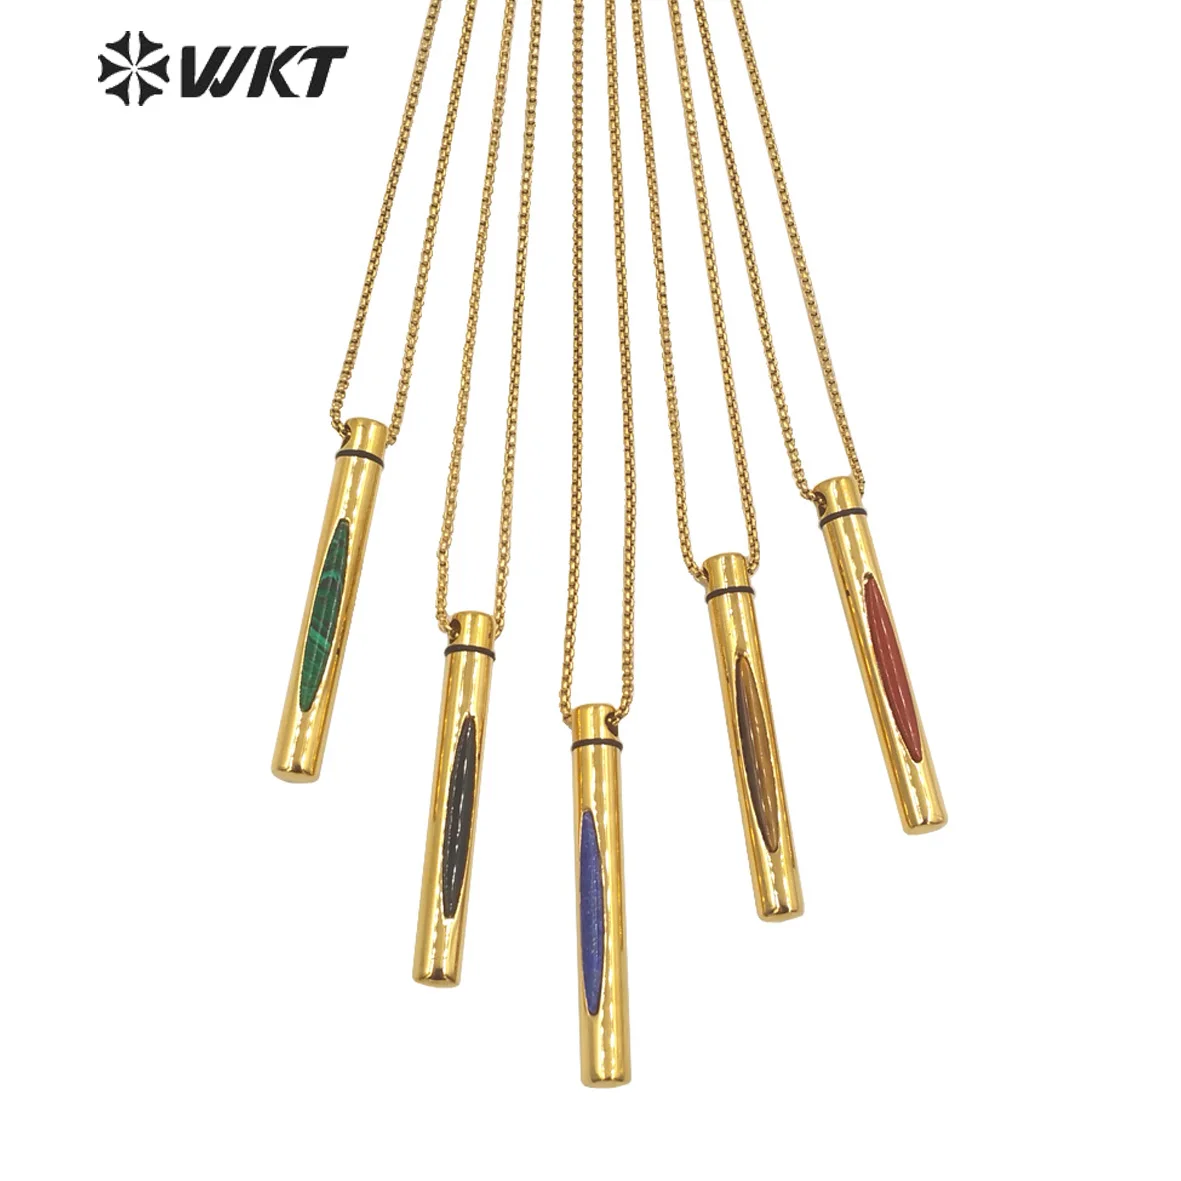 WT-N1371  WKT 2022 fashion style Natural colorful gemstones gold-plate necklace for wedding necklace for party perfume bottle